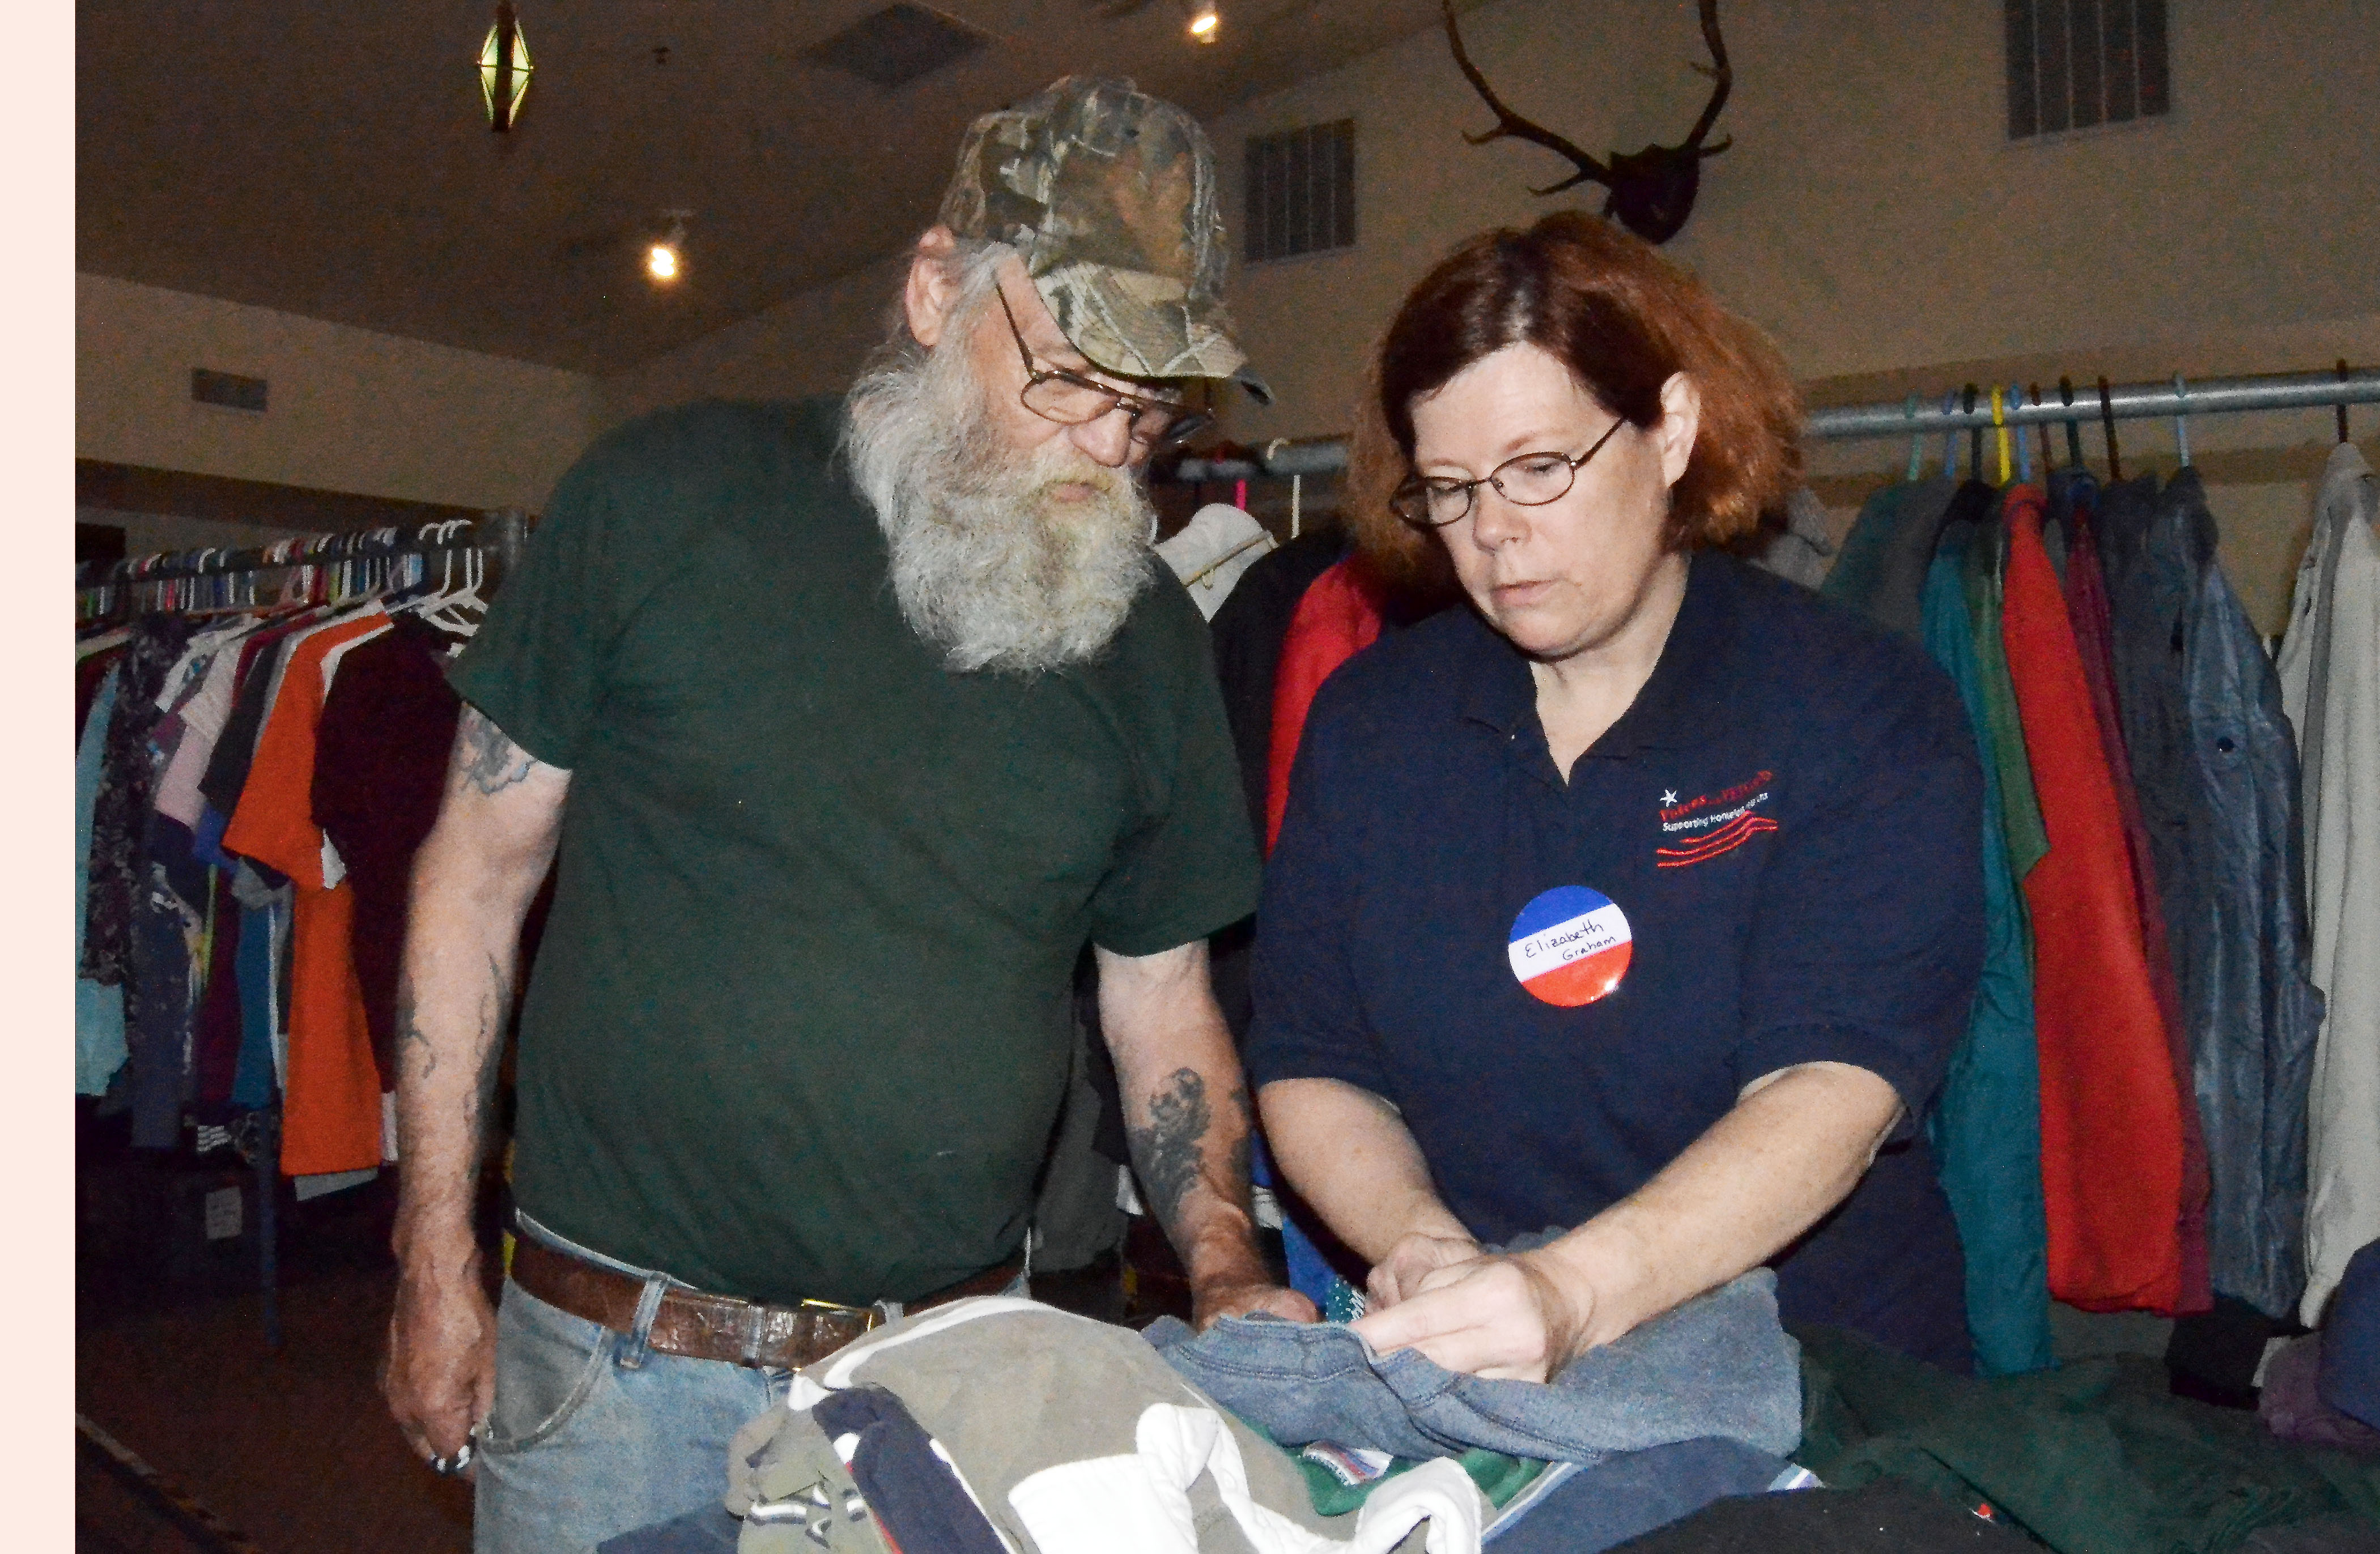 Veteran Howard Shipley selects clothes with the help of Elizabeth Graham at the “Stand Down” event in Port Townsend on Monday. —Photo by Charlie Bermant/Peninsula Daily News